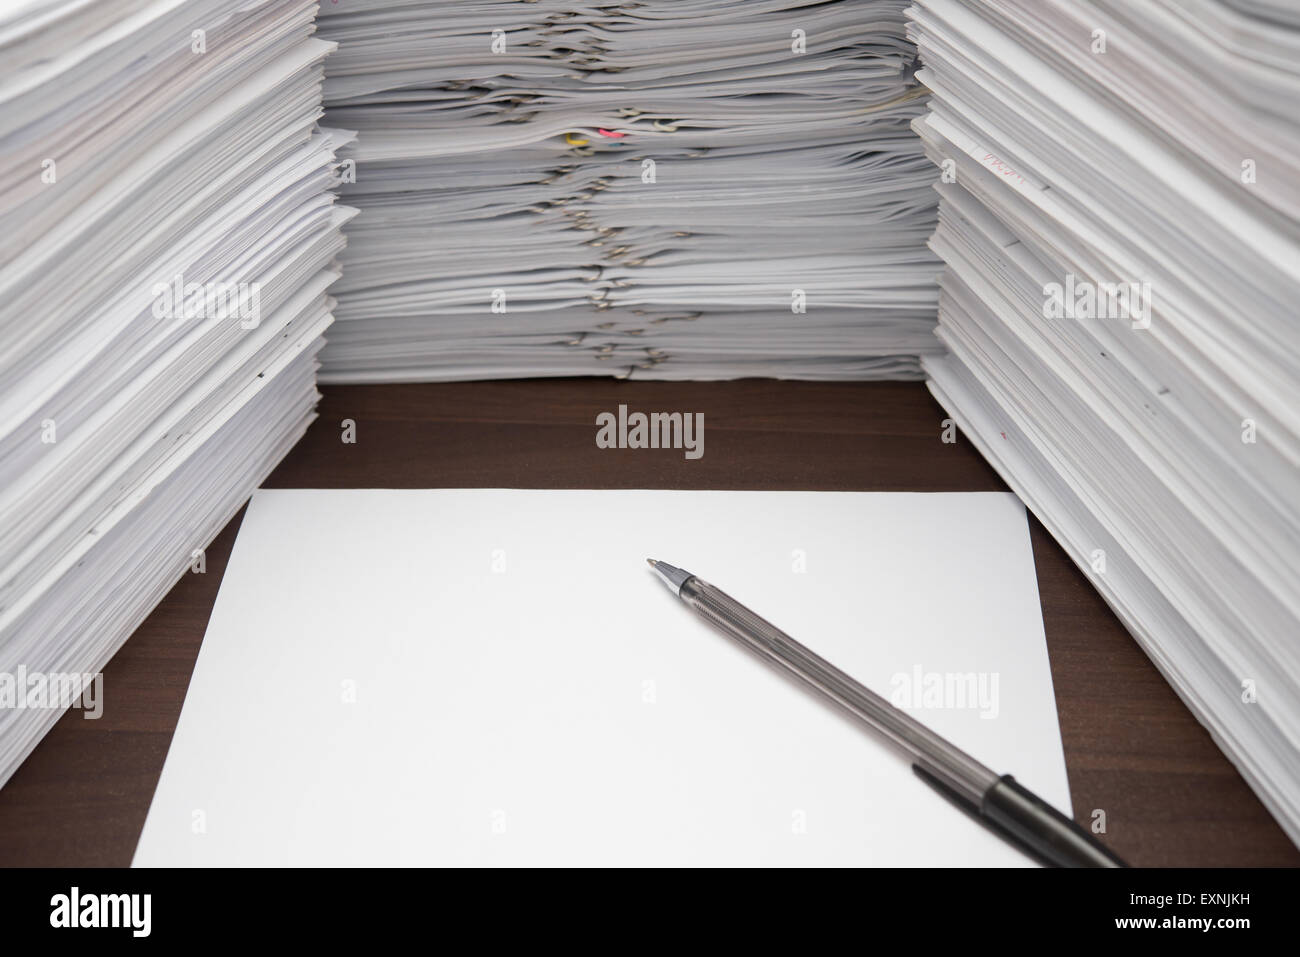 pen and blank paper besides piles of documents Stock Photo